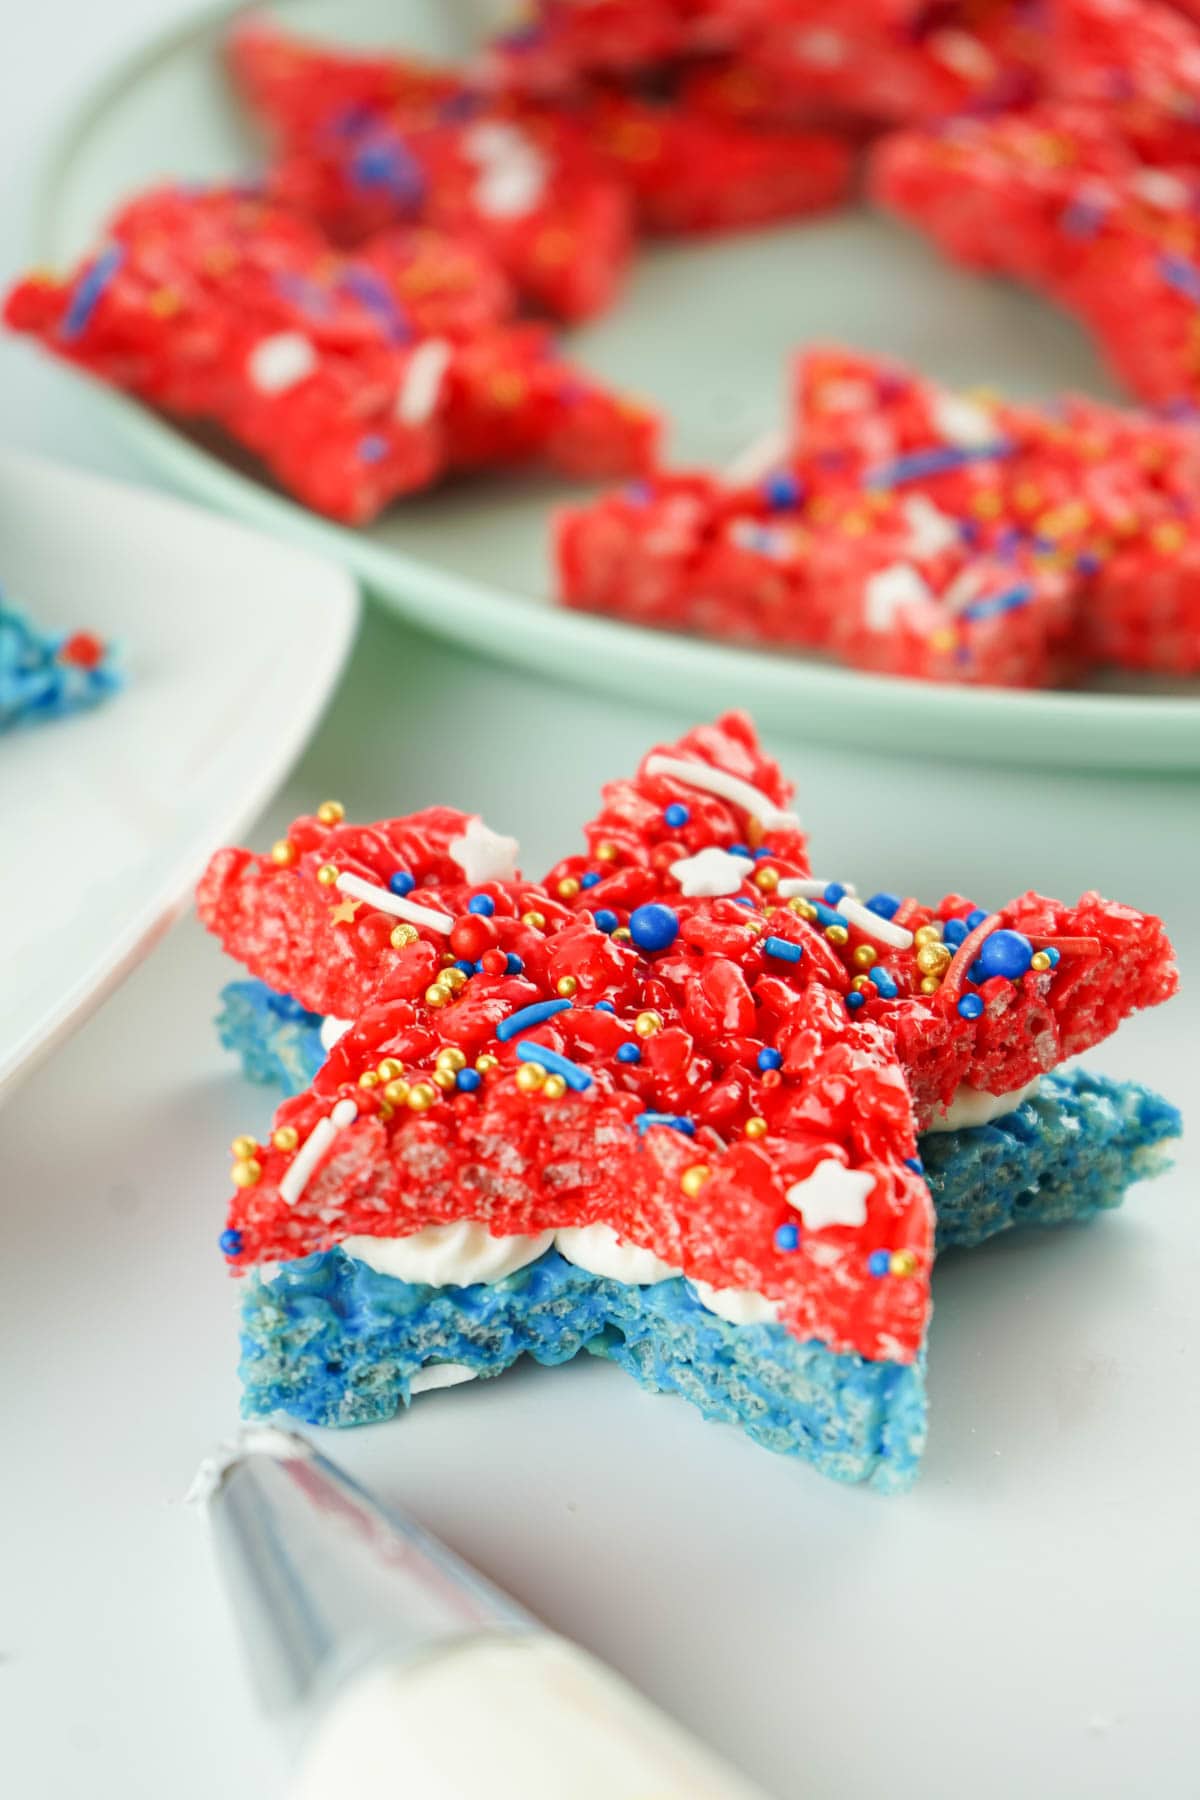 Blue and red krispie treats with icing in between